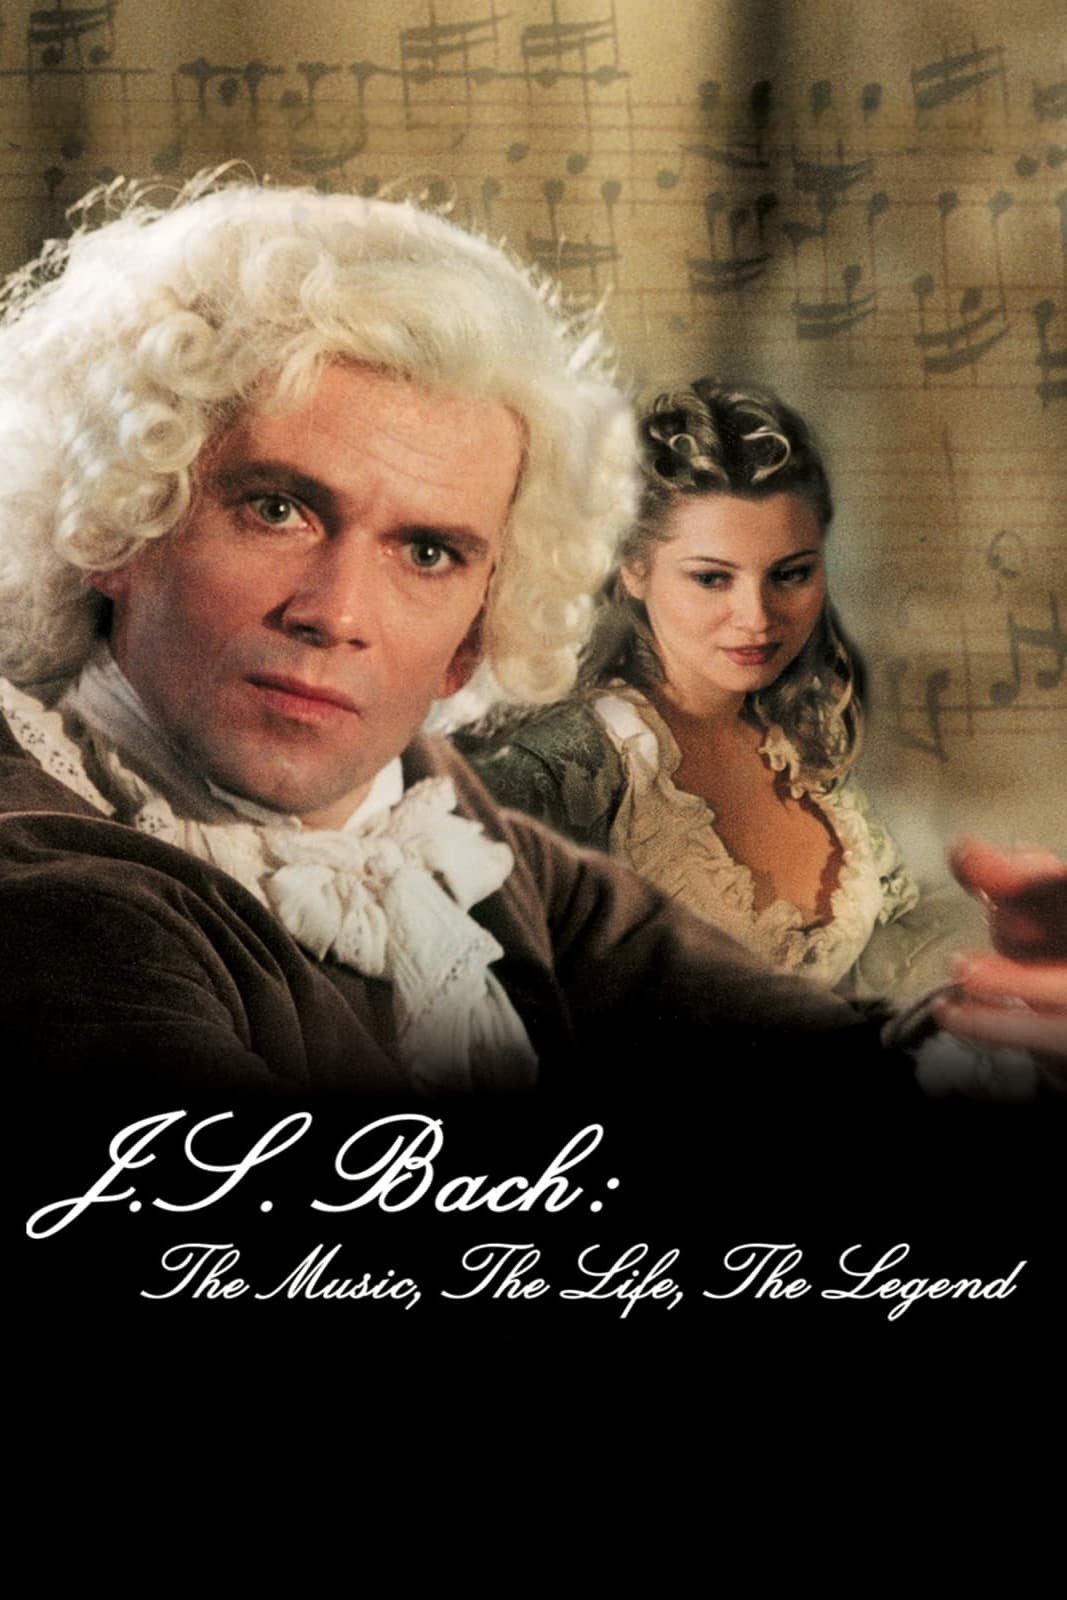 J.S. Bach: The Music, The Life, The Legend (2003)